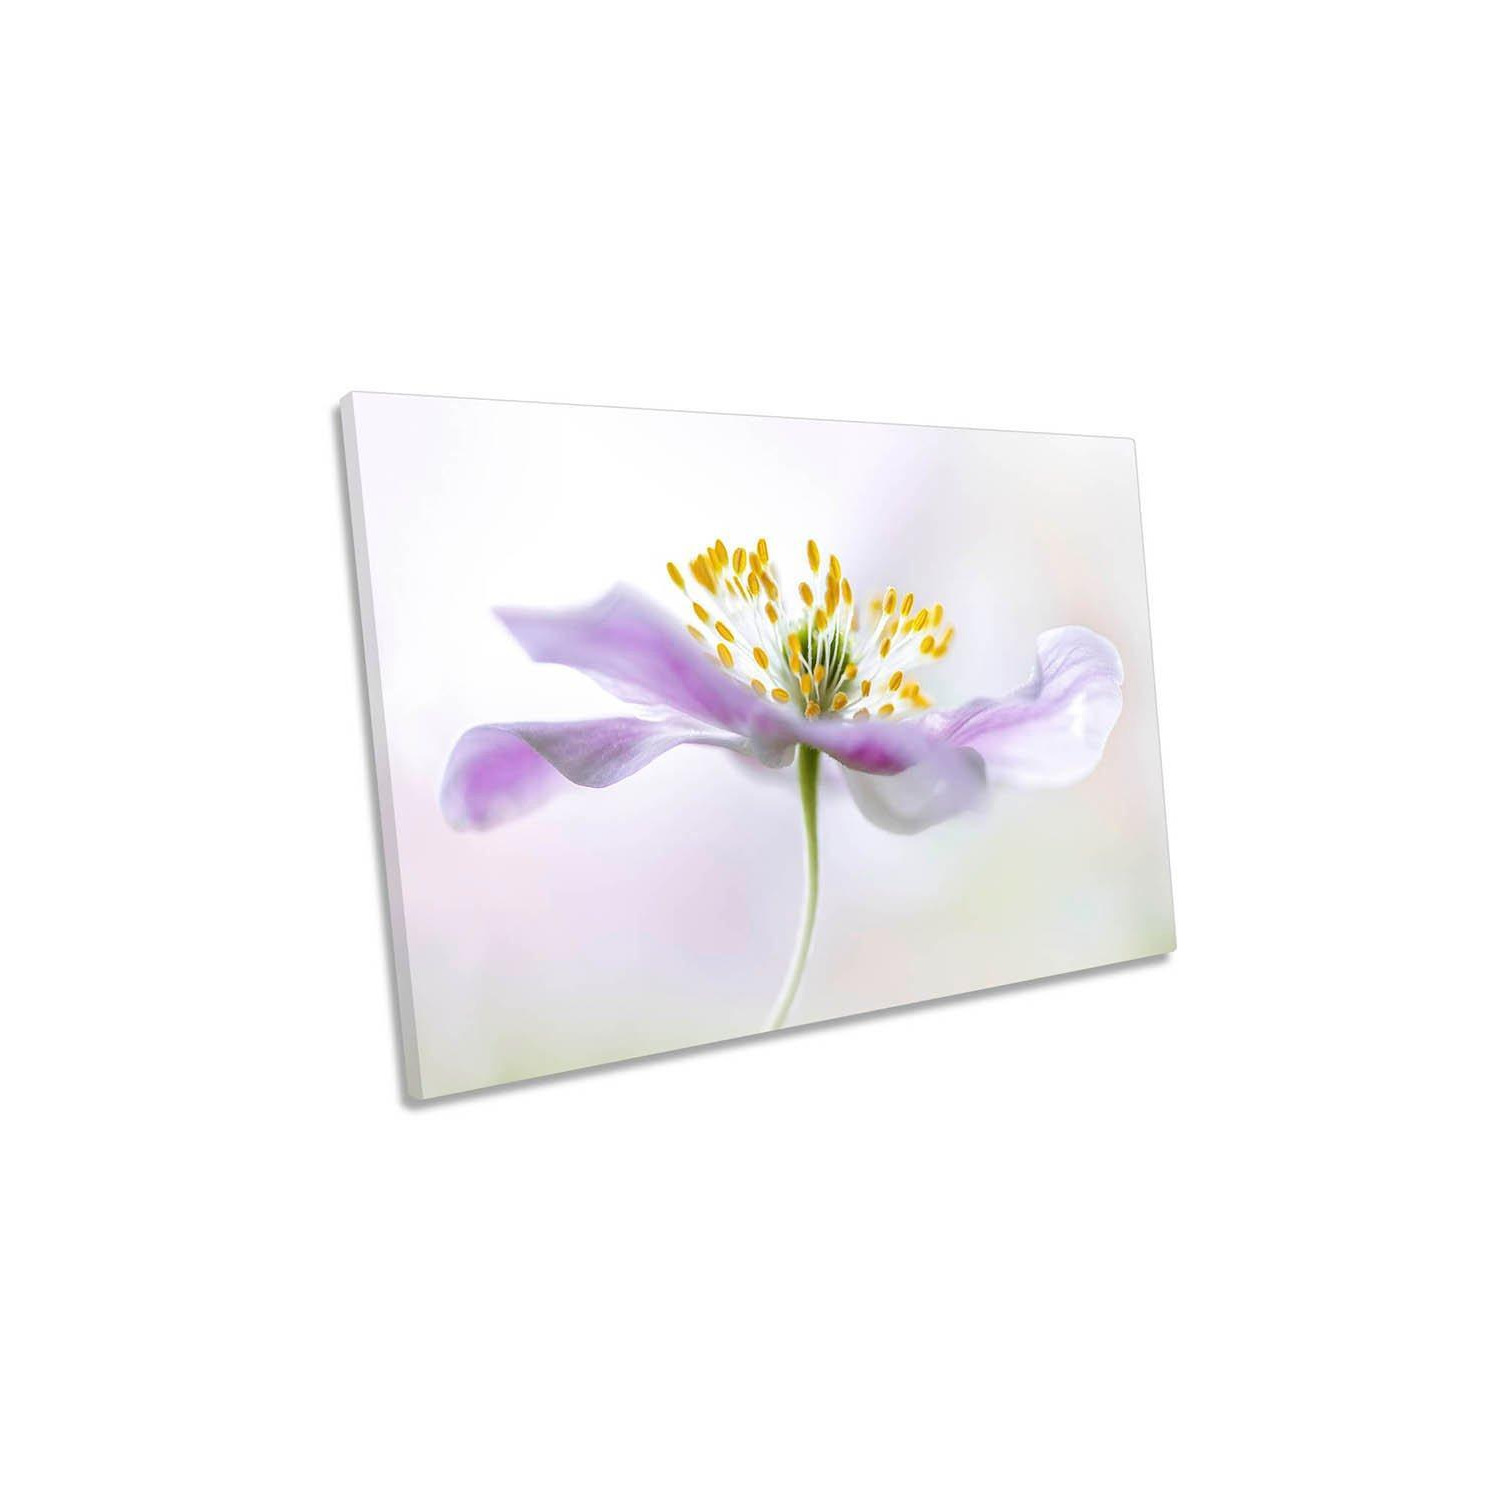 Anemone Flower Floral Purple Canvas Wall Art Picture Print - image 1